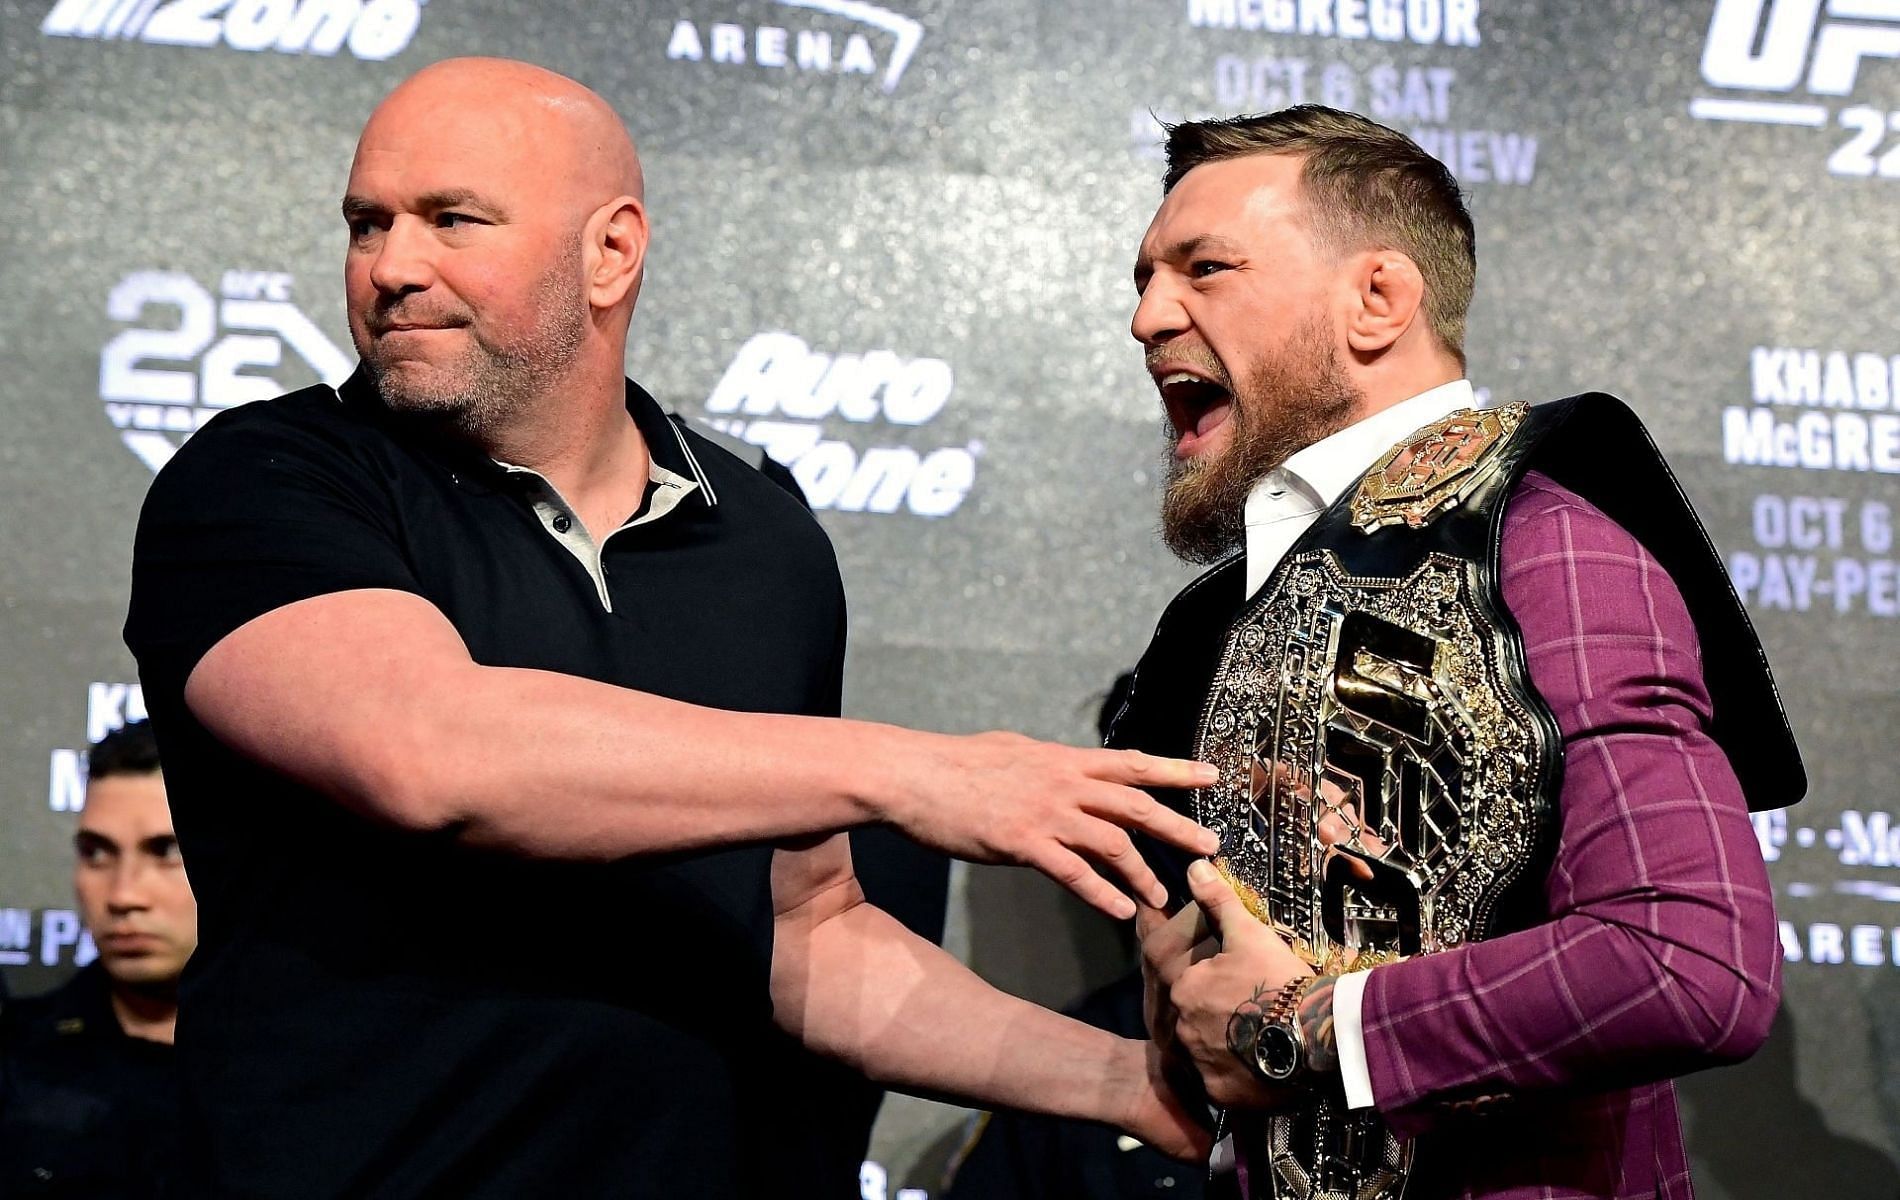 Dana White holds back Conor McGregor during UFC 229 Press Conference